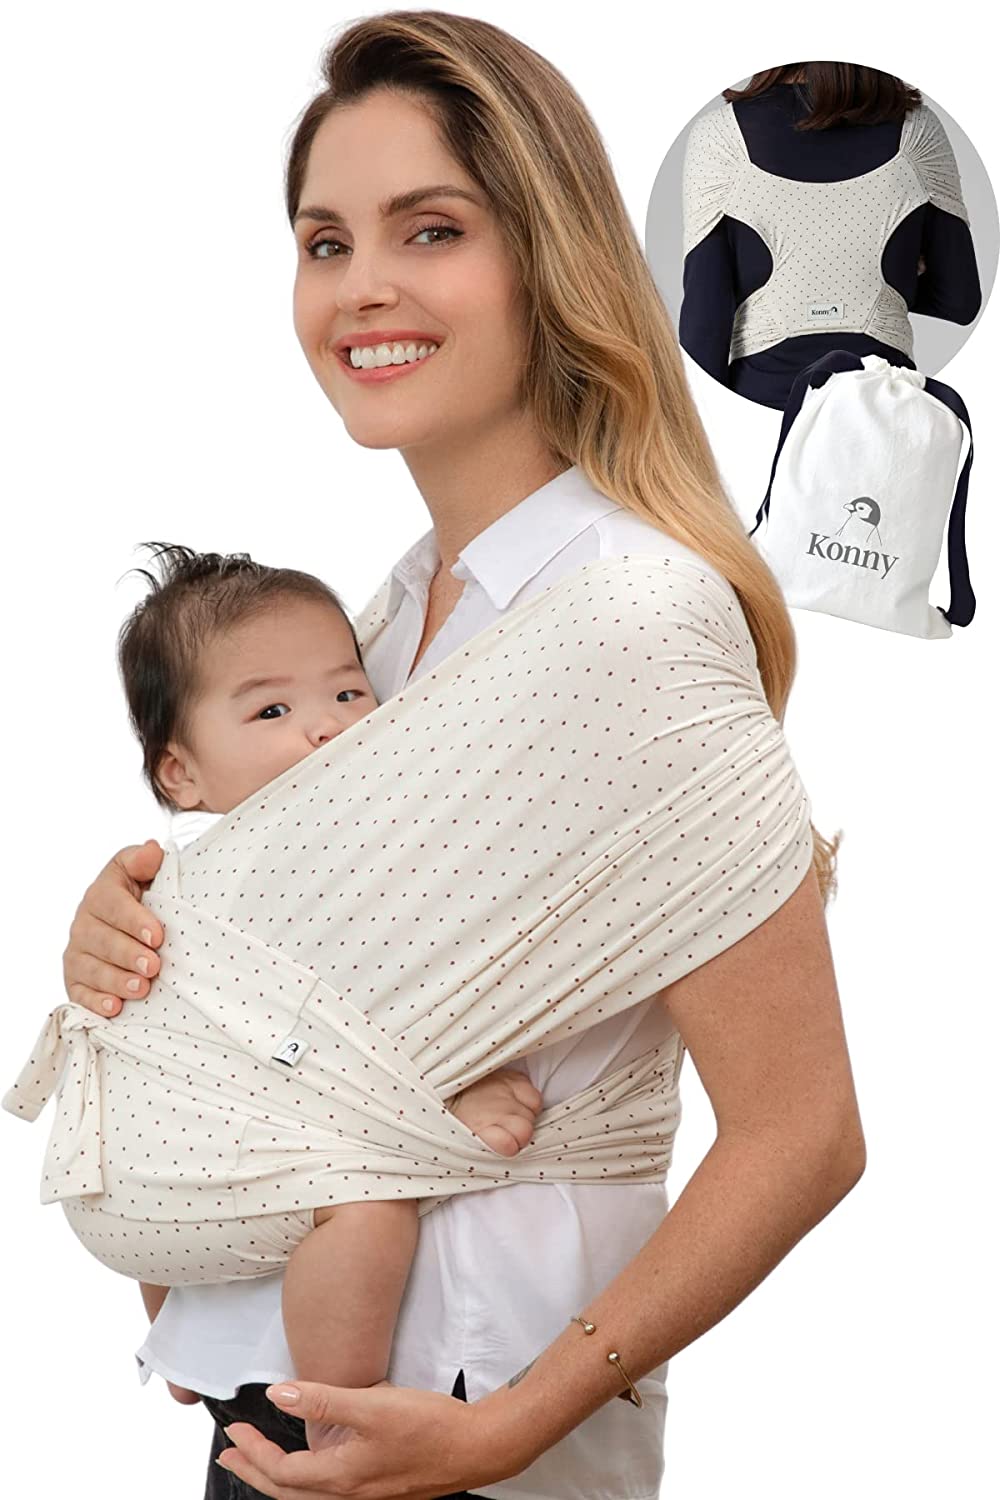 Konny Baby Carrier Ultralight, Stress-Free Sling for Newborns, Toddlers up to 20 kg, Soft and Breathable Fabric, Reasonable Sleep Solution